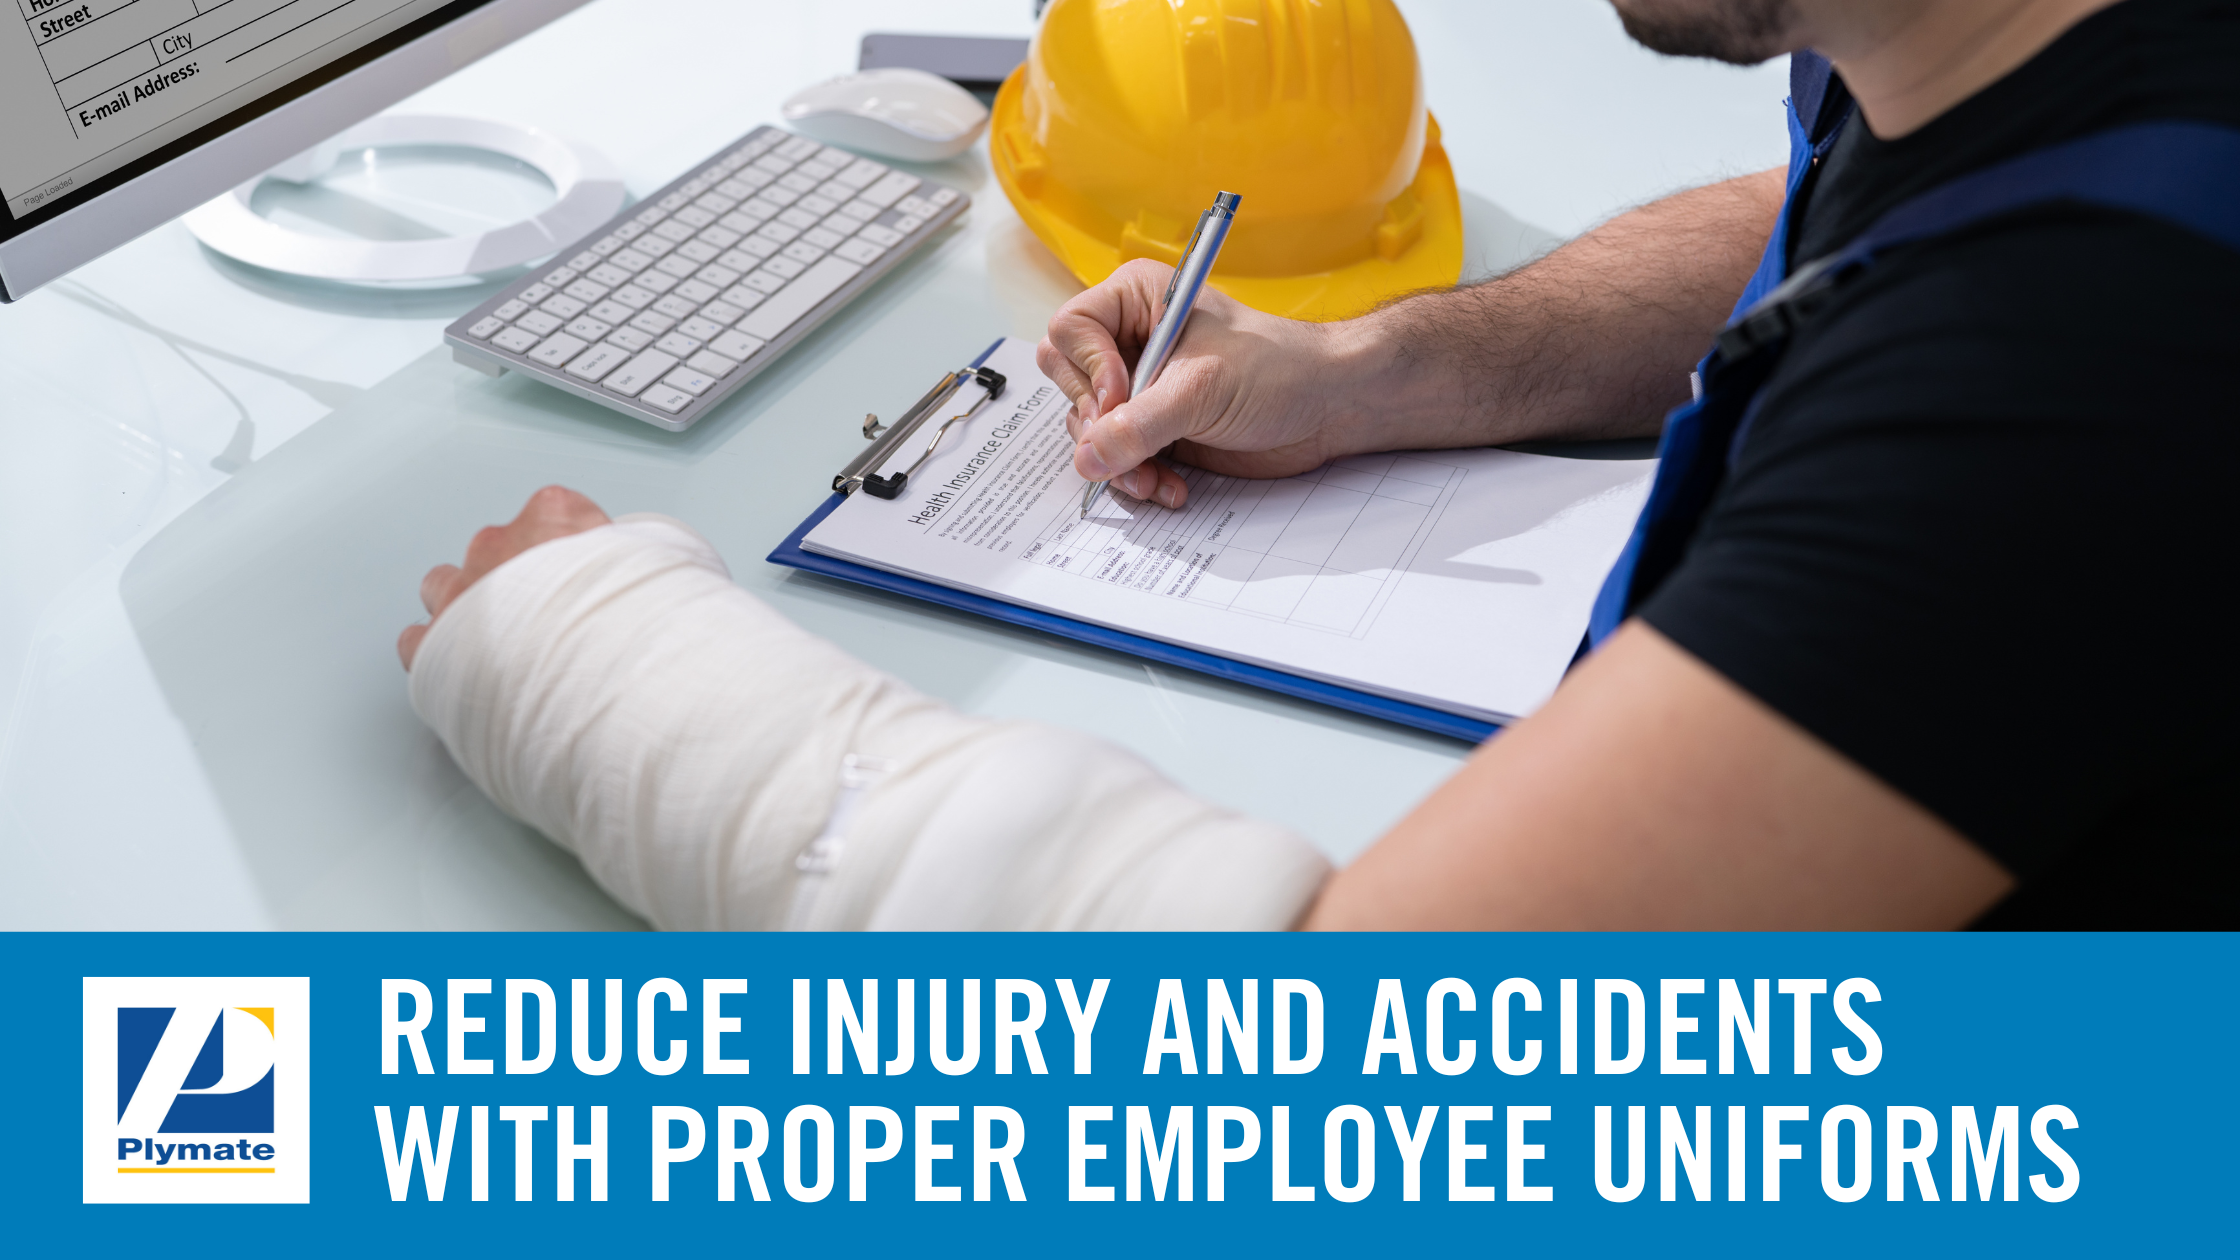 reduce injuries with proper uniforms